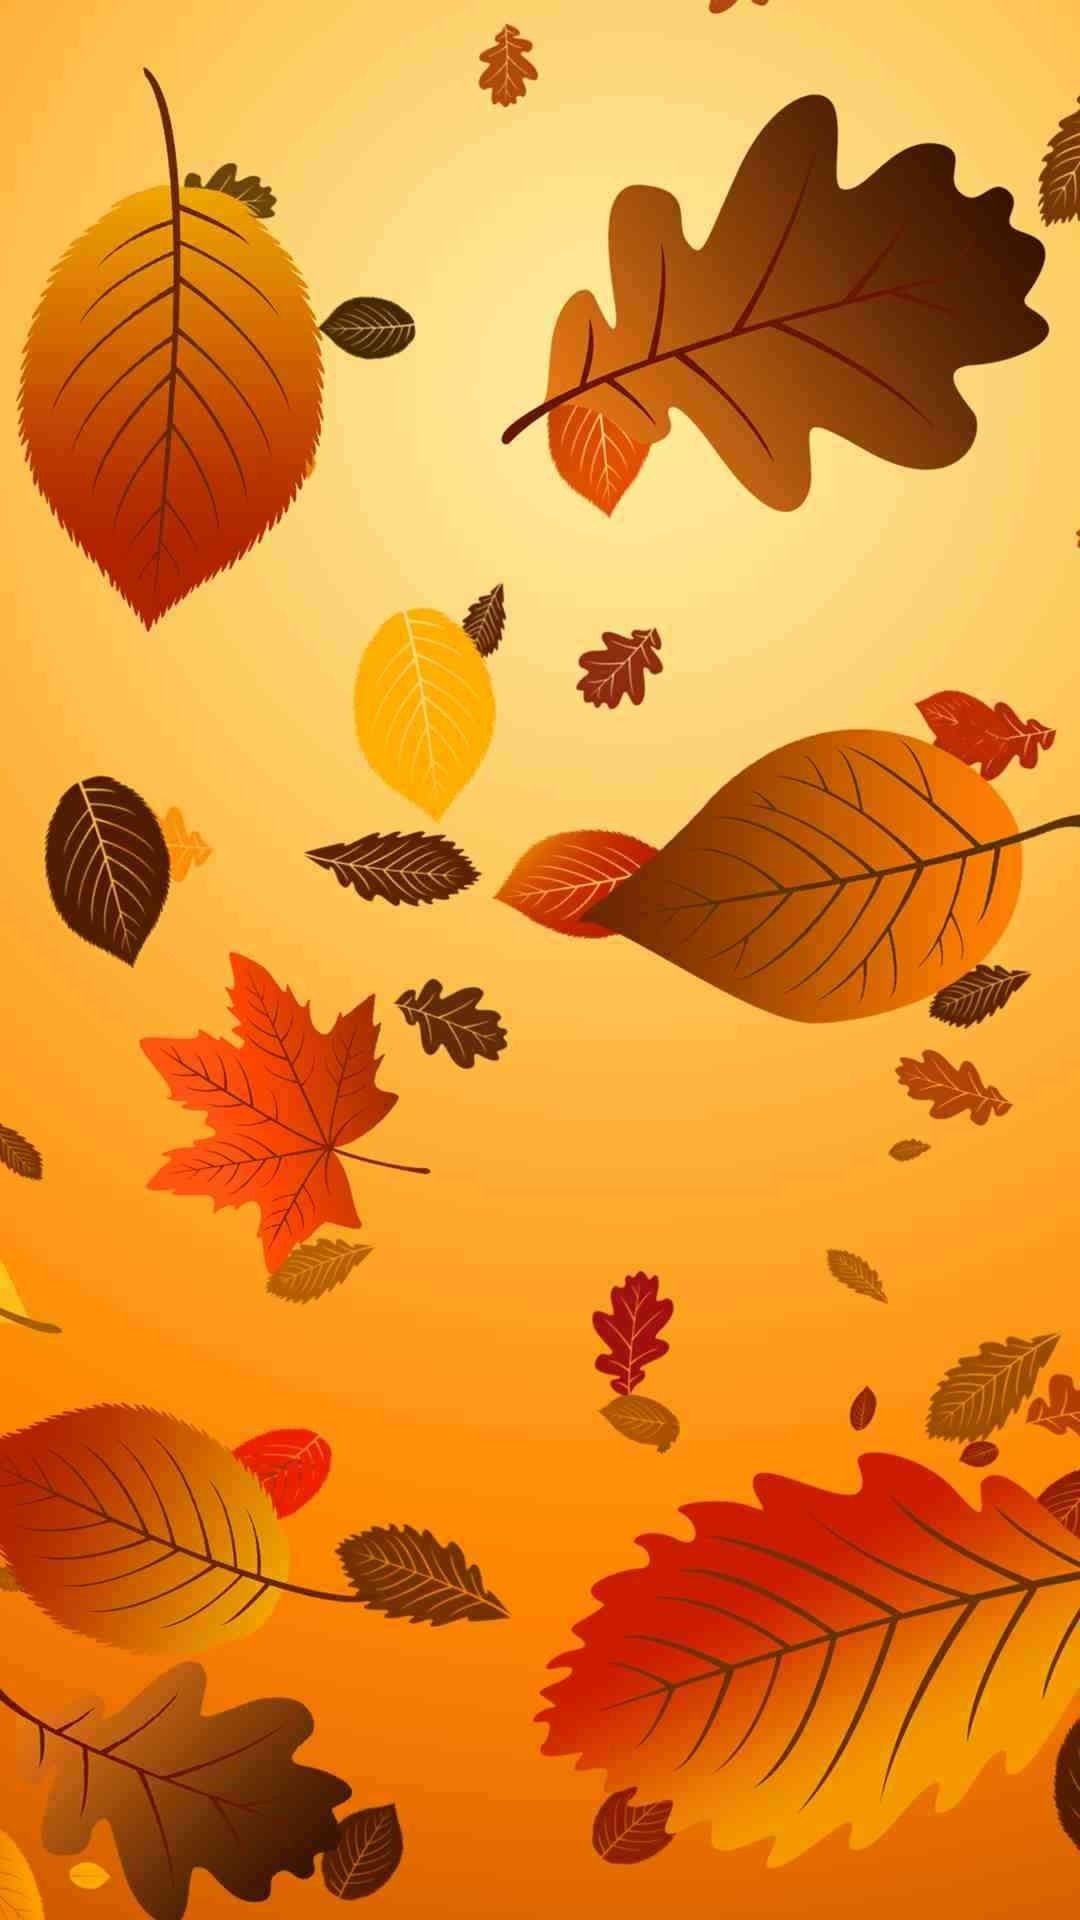 Thanksgiving Cell Phone Wallpapers